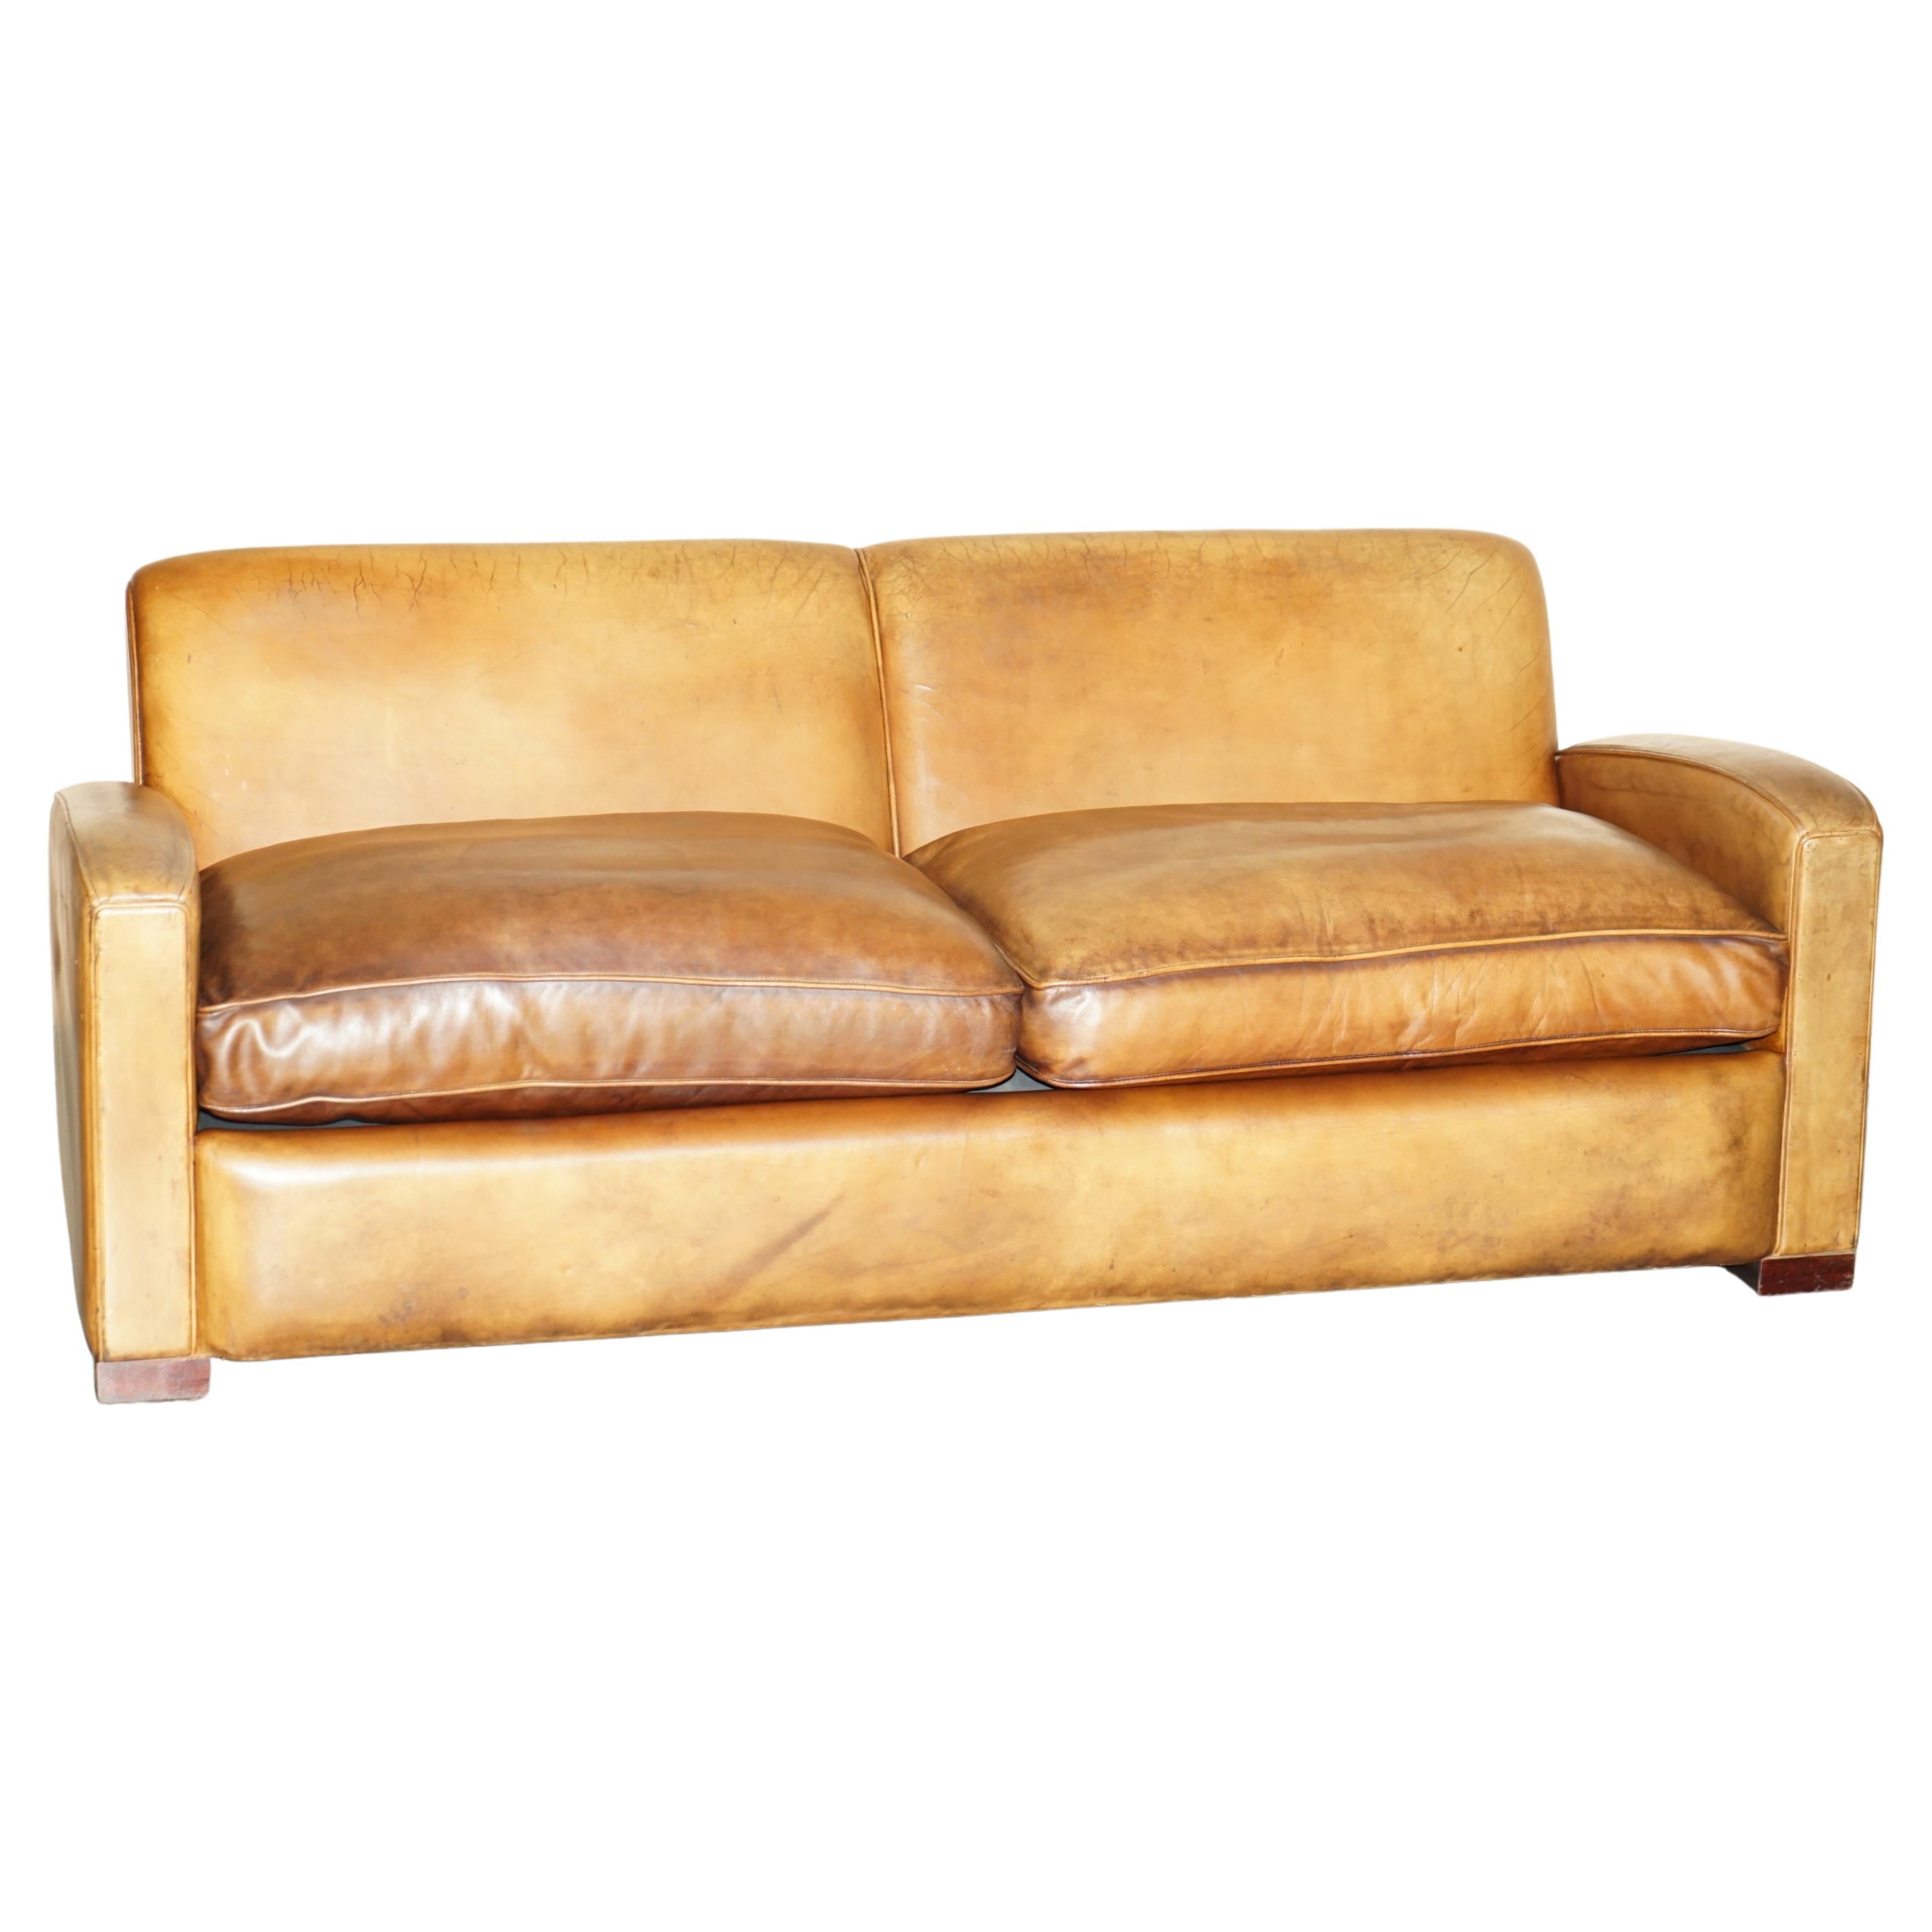 Hand Dyed Brown Leather Art Deco Odeon Style Three Seat Sofa Feather Filled Seat For Sale